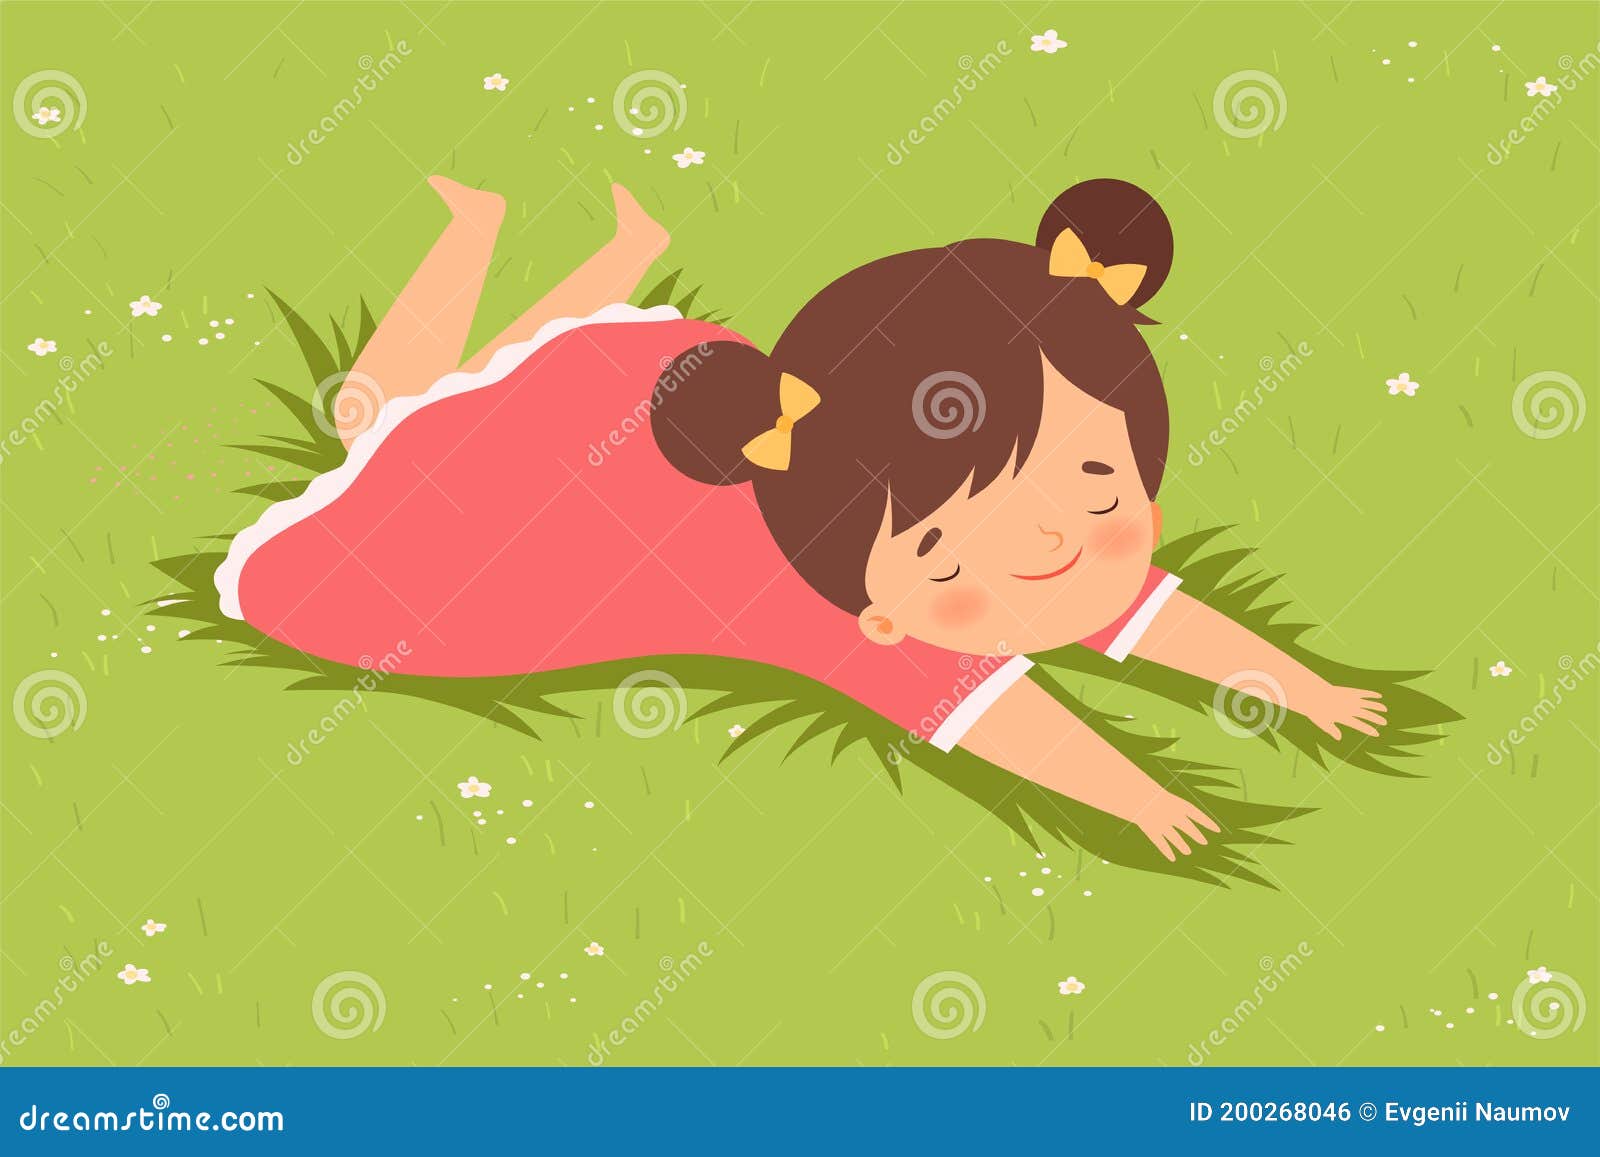 Lovely Girl Lying Down on Green Lawn on Her Stomach, Cute Kid Having Fun  Outdoors Cartoon Vector Illustration Stock Vector - Illustration of  children, meadow: 200268046